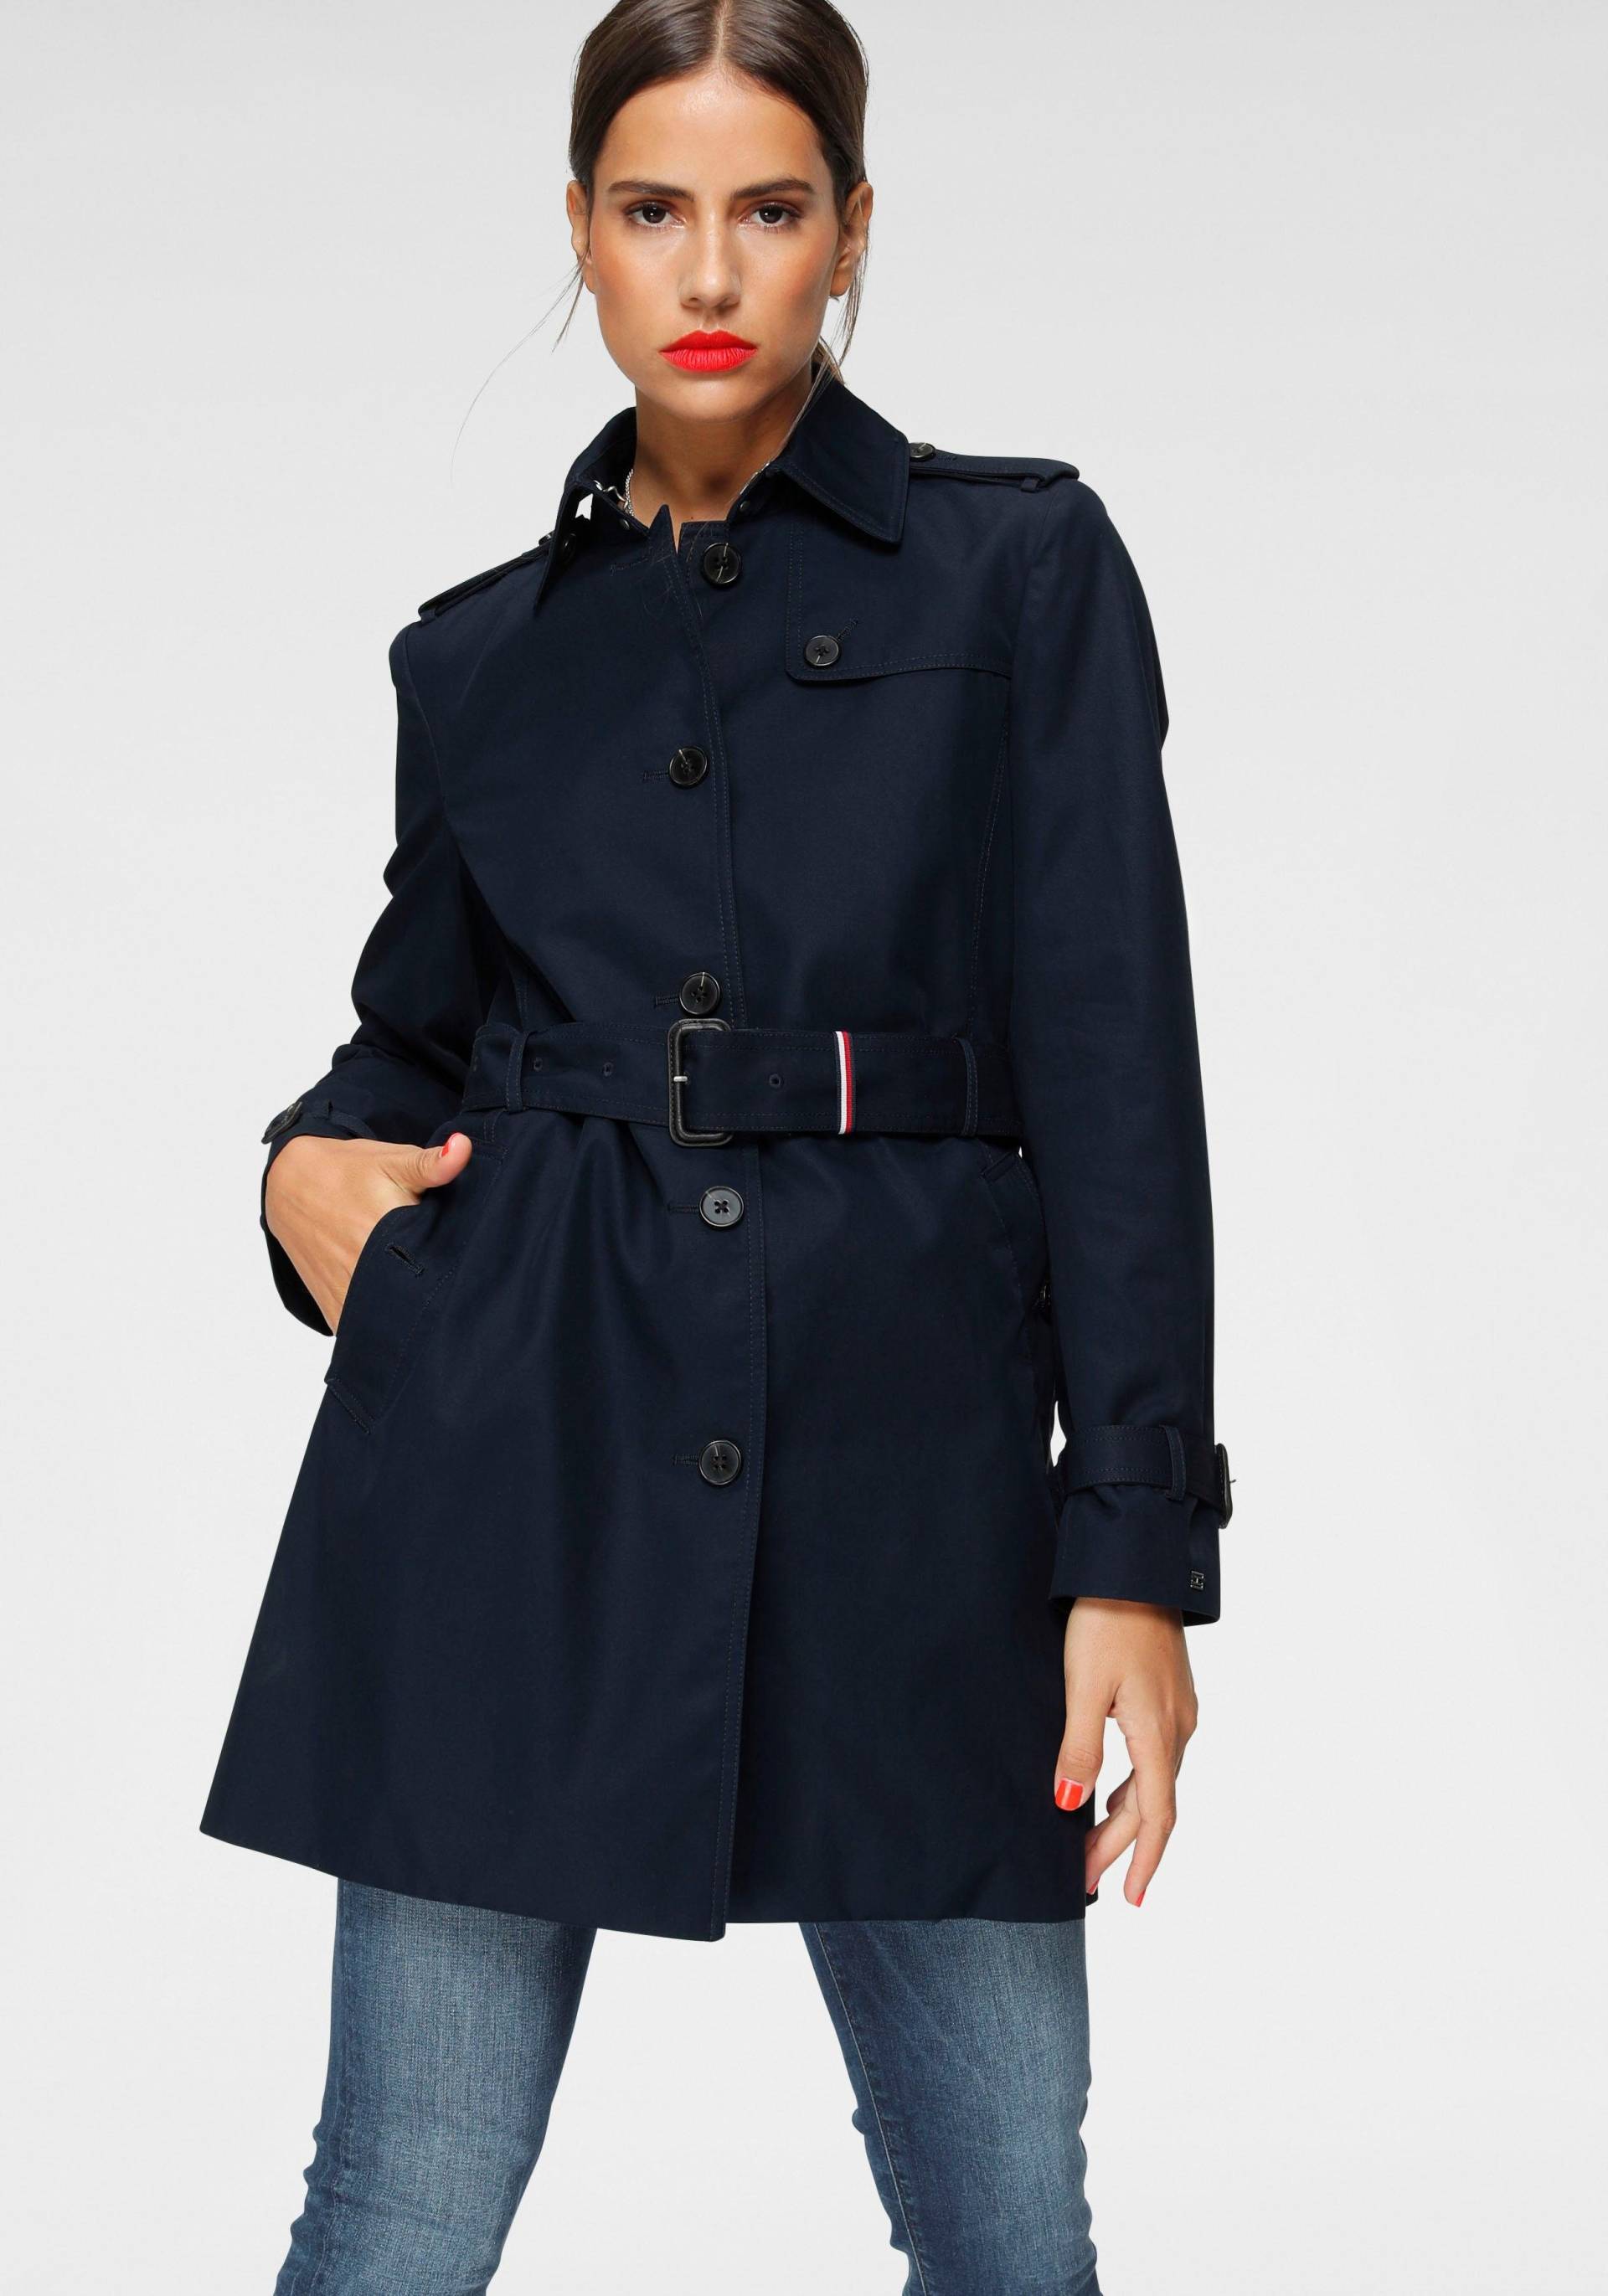 Tommy Hilfiger Langjacke »HERITAGE SINGLE BREASTED TRENCH« von TOMMY HILFIGER